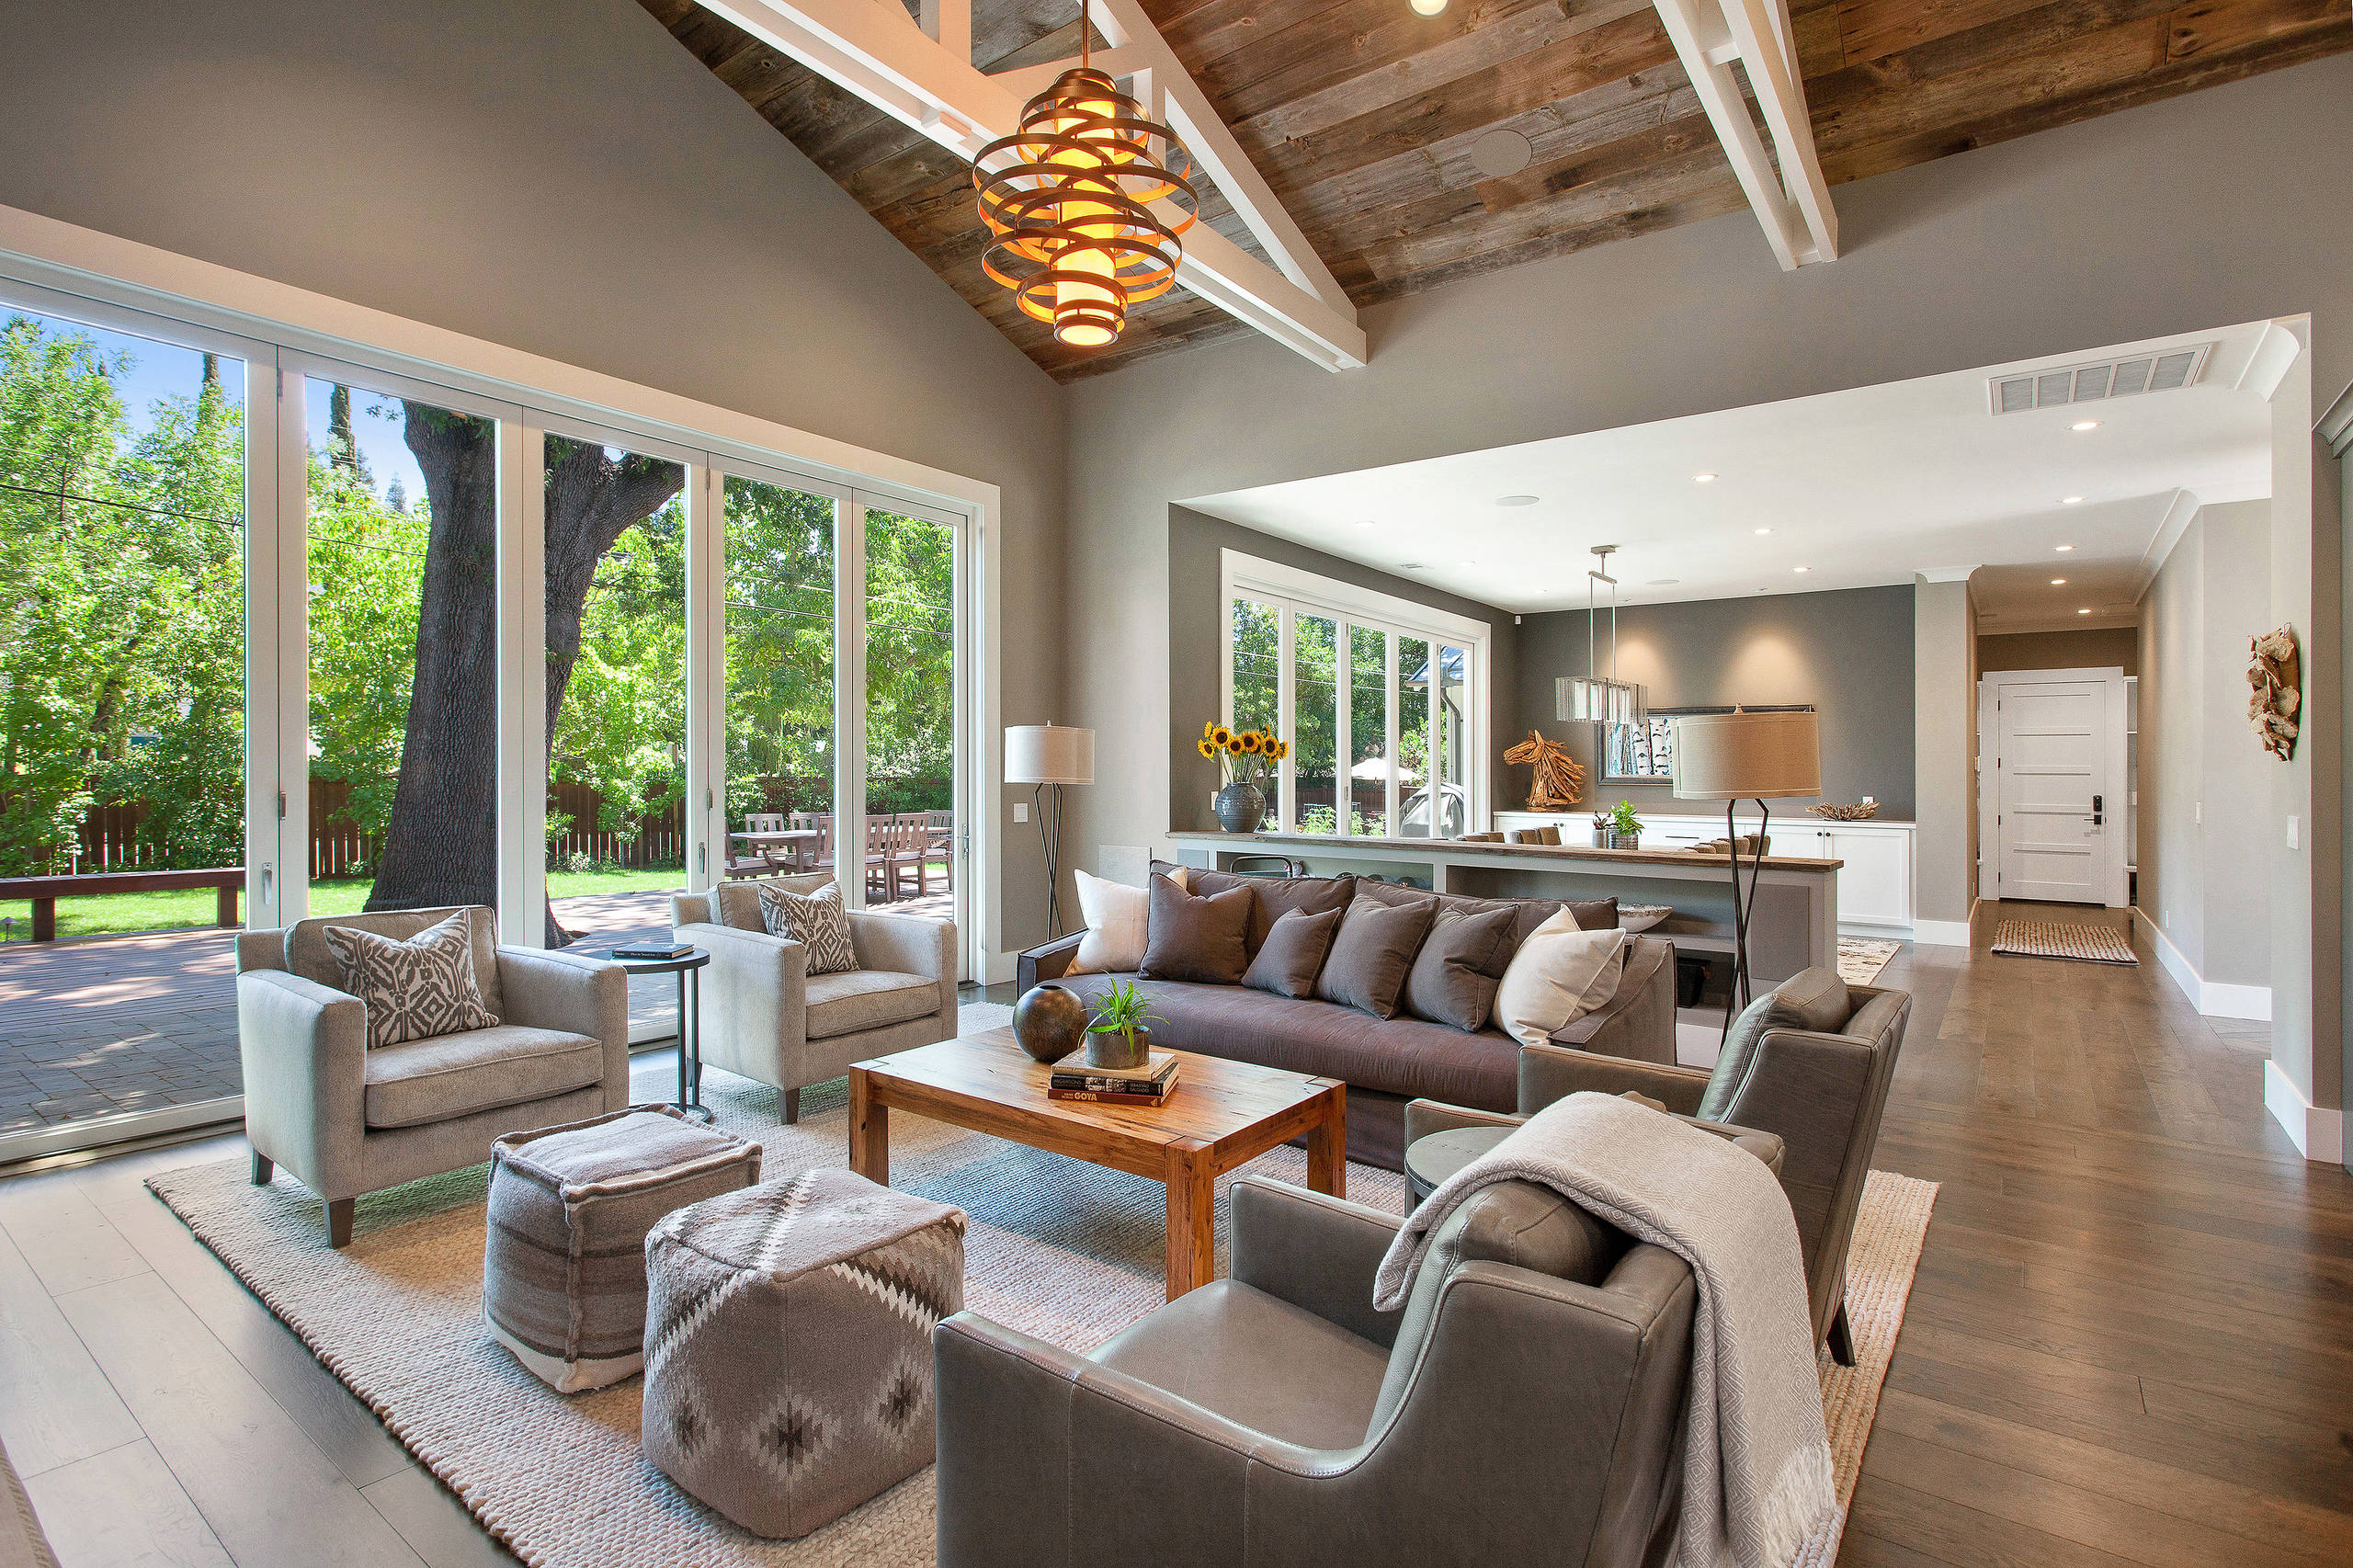 Gray Modern Farmhouse Living Room: 20 Beautiful Examples That Will Make You Fall In Love With